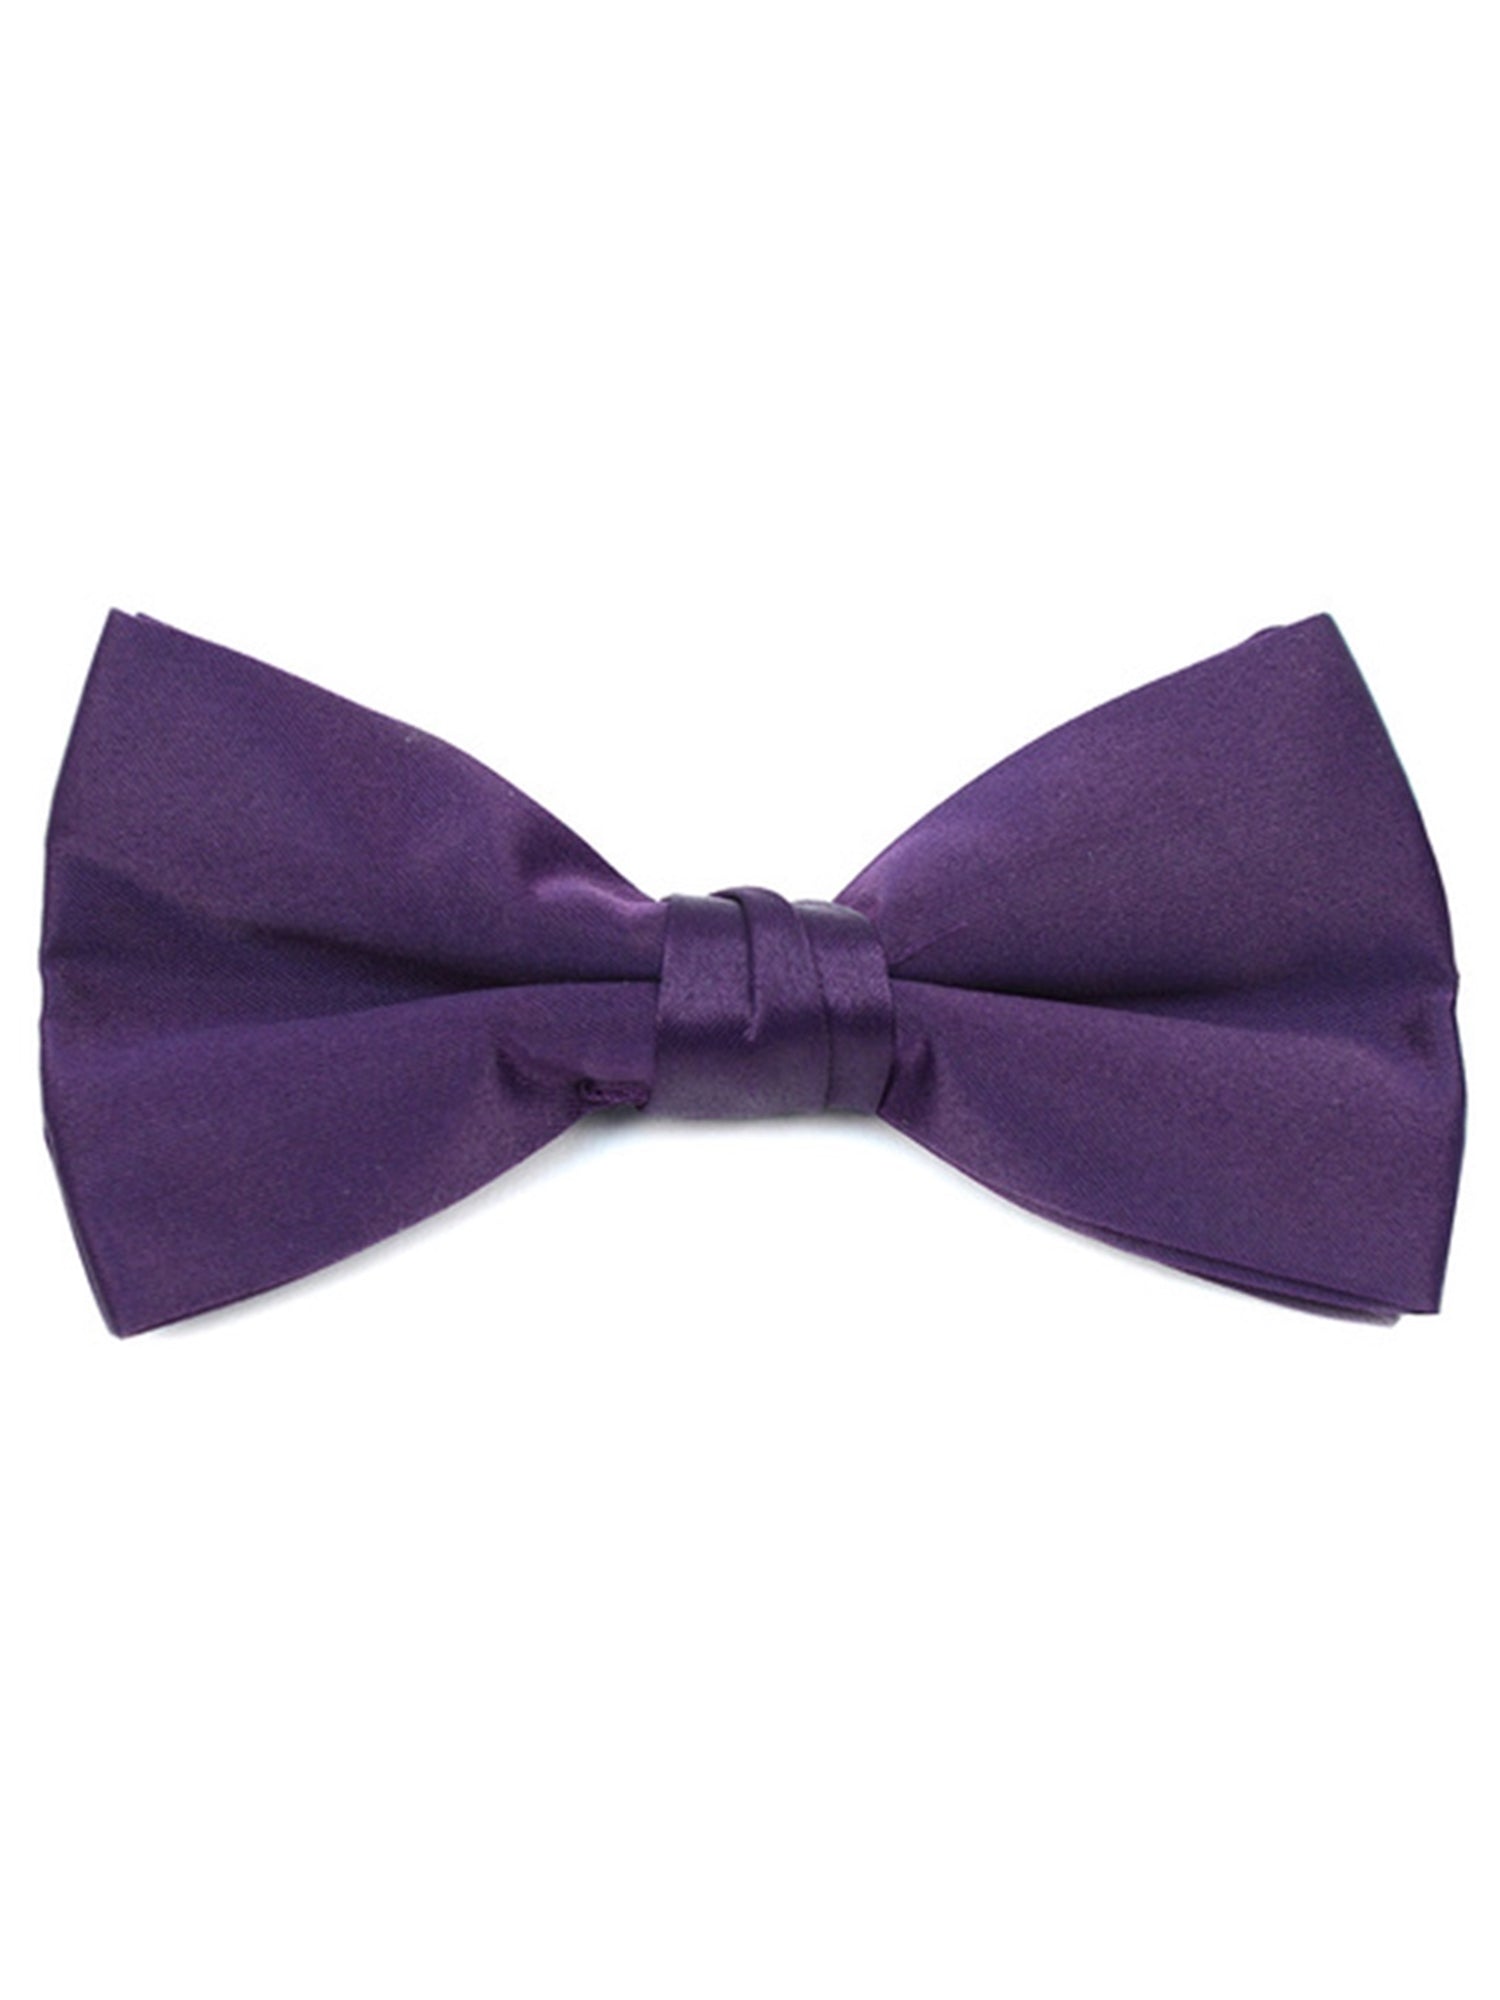 Young Boy's Pre-tied Clip On Bow Tie - Formal Tuxedo Solid Color Boy's Solid Color Bow Tie TheDapperTie Dark Purple One Size 